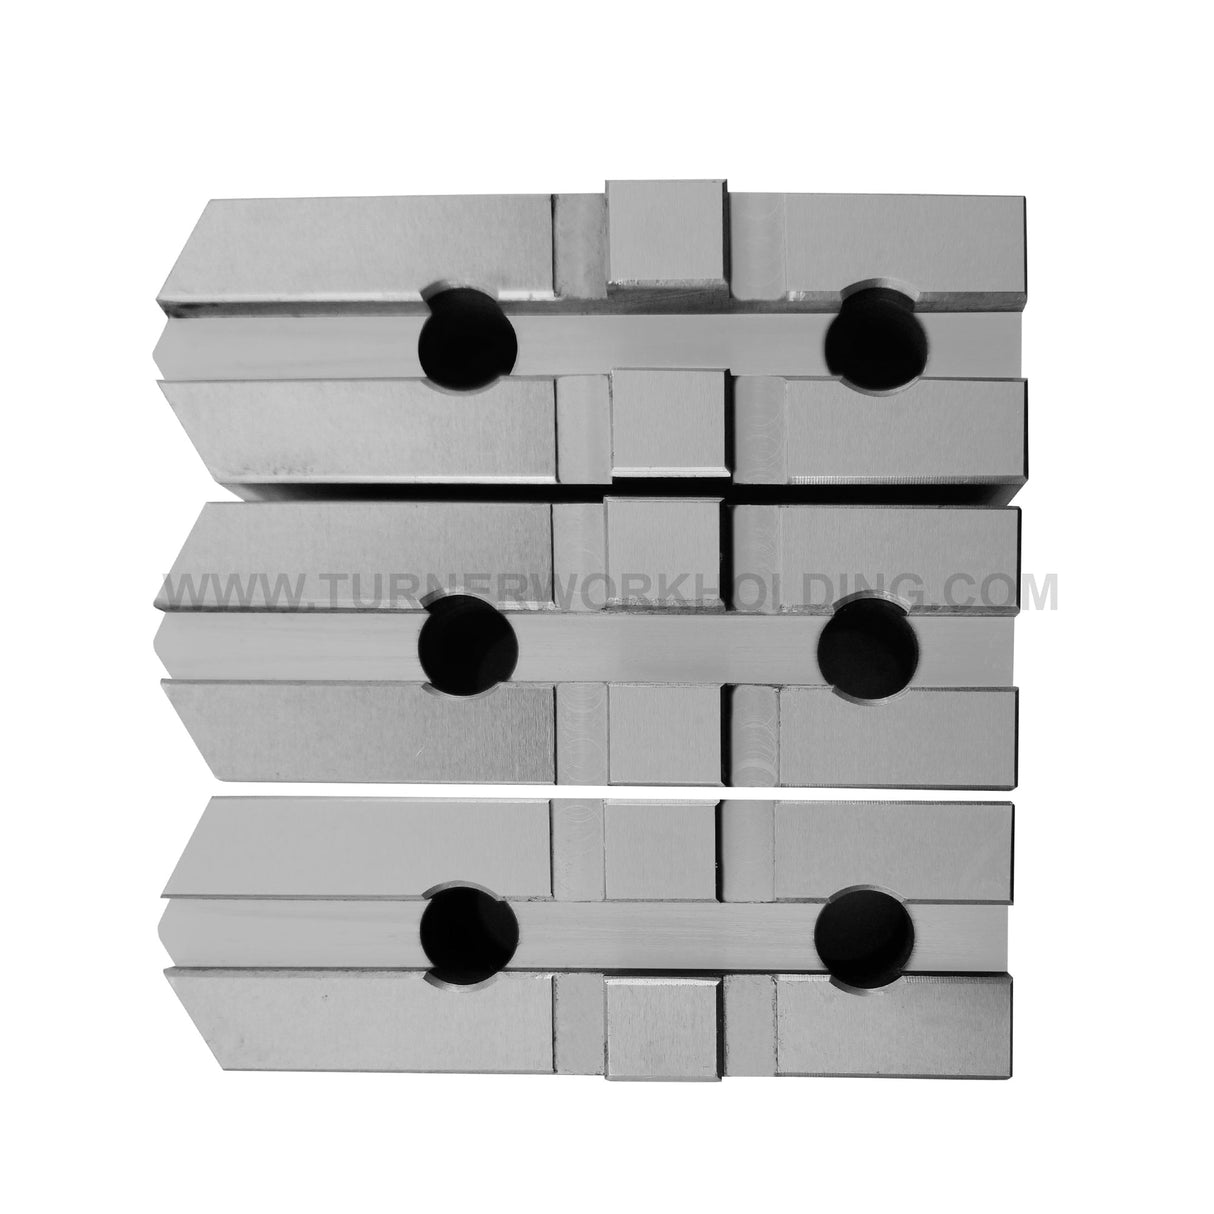 TG-6C-2.0-SP - AMERICAN STANDARD STEEL SOFT JAWS FOR TONGUE & GROOVE 6" CHUCK 2" HT (3 PC SET)